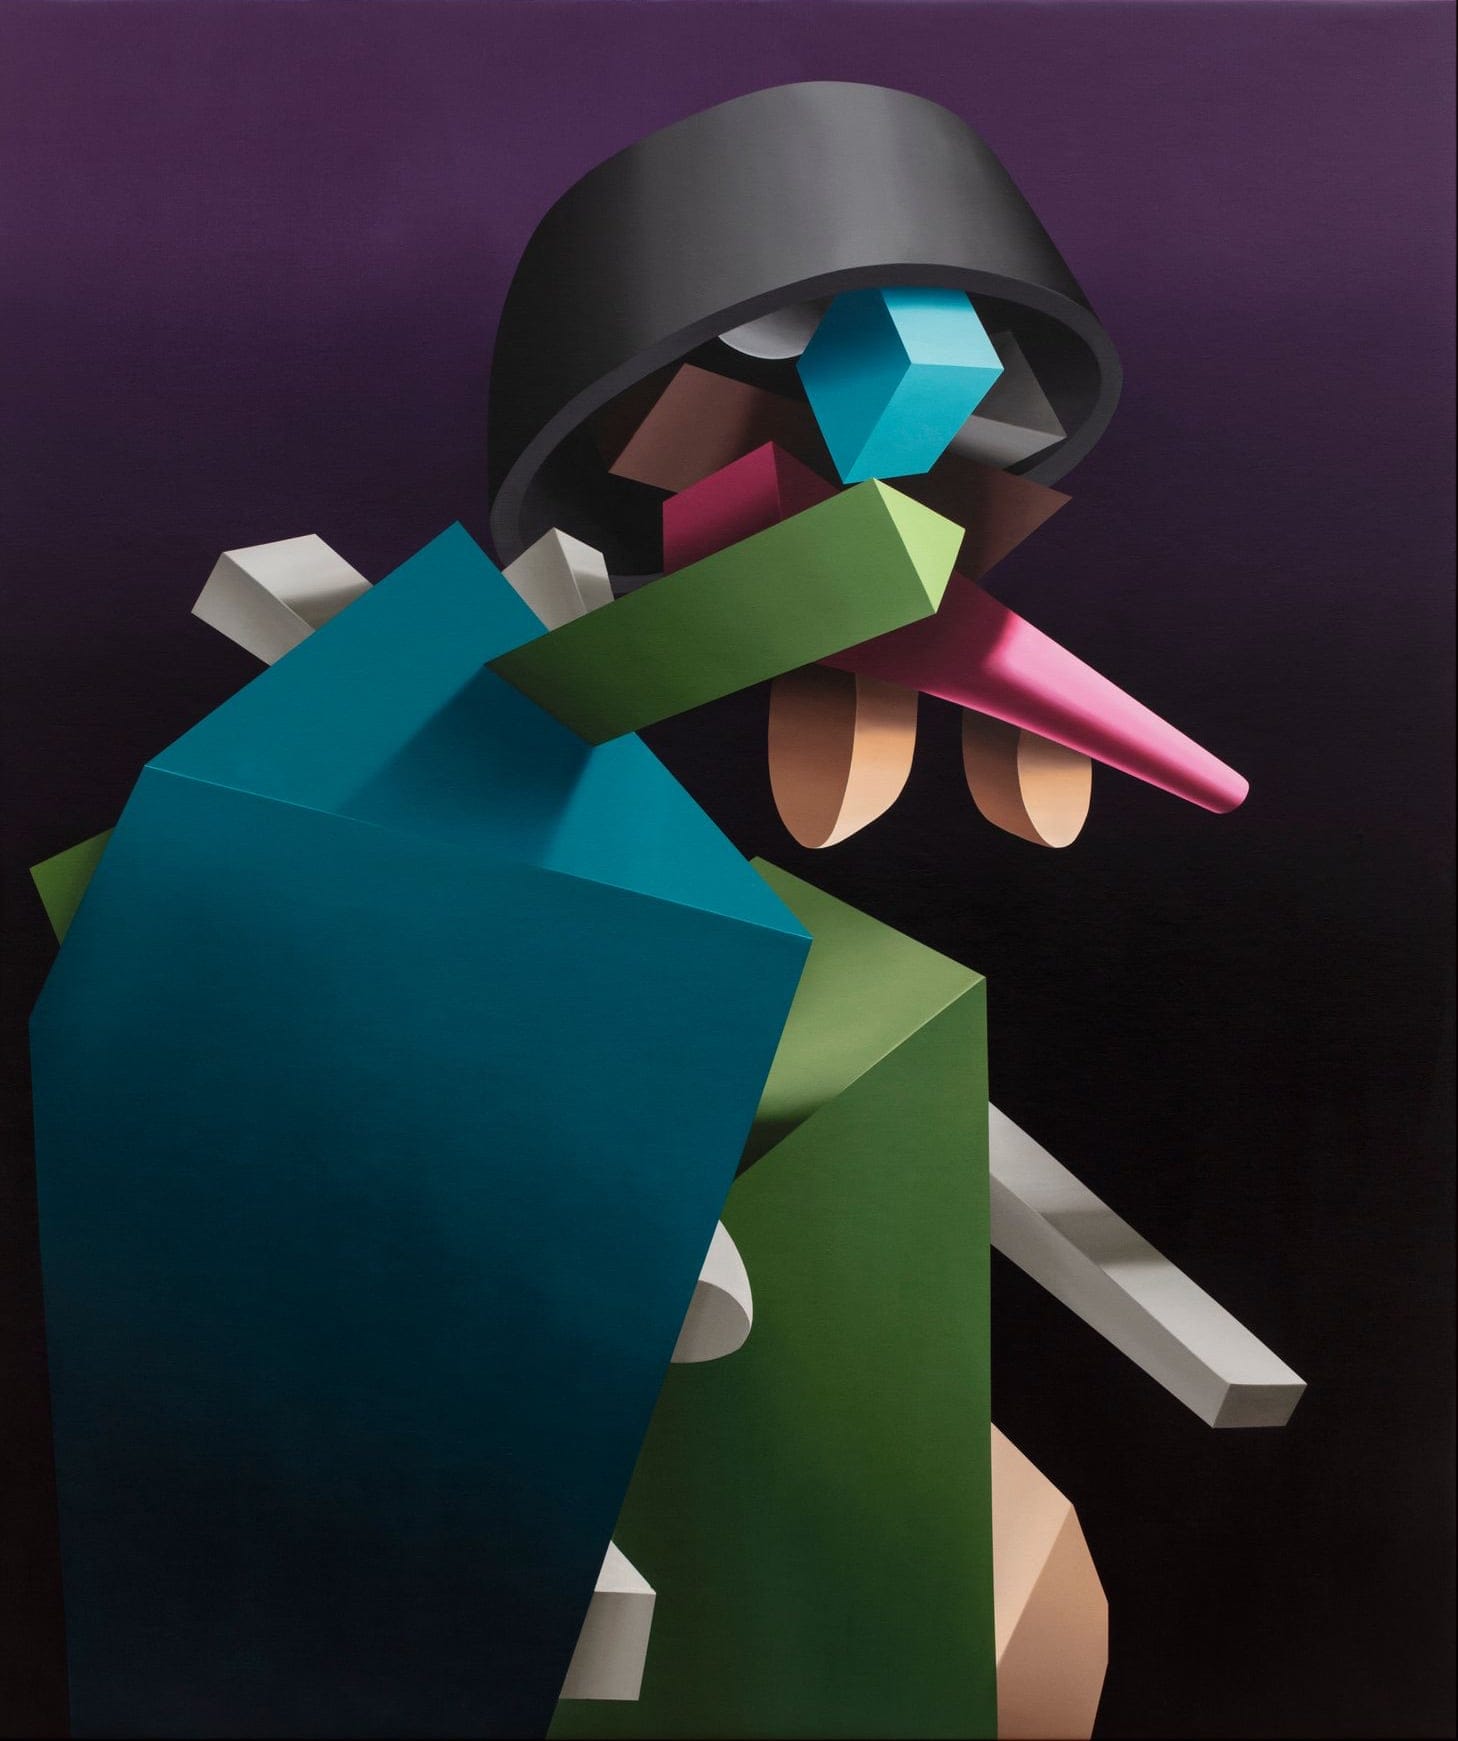 an abstract portrait of a figure painted chunky, colorful shapes including a blue body and black bowl shaped hat